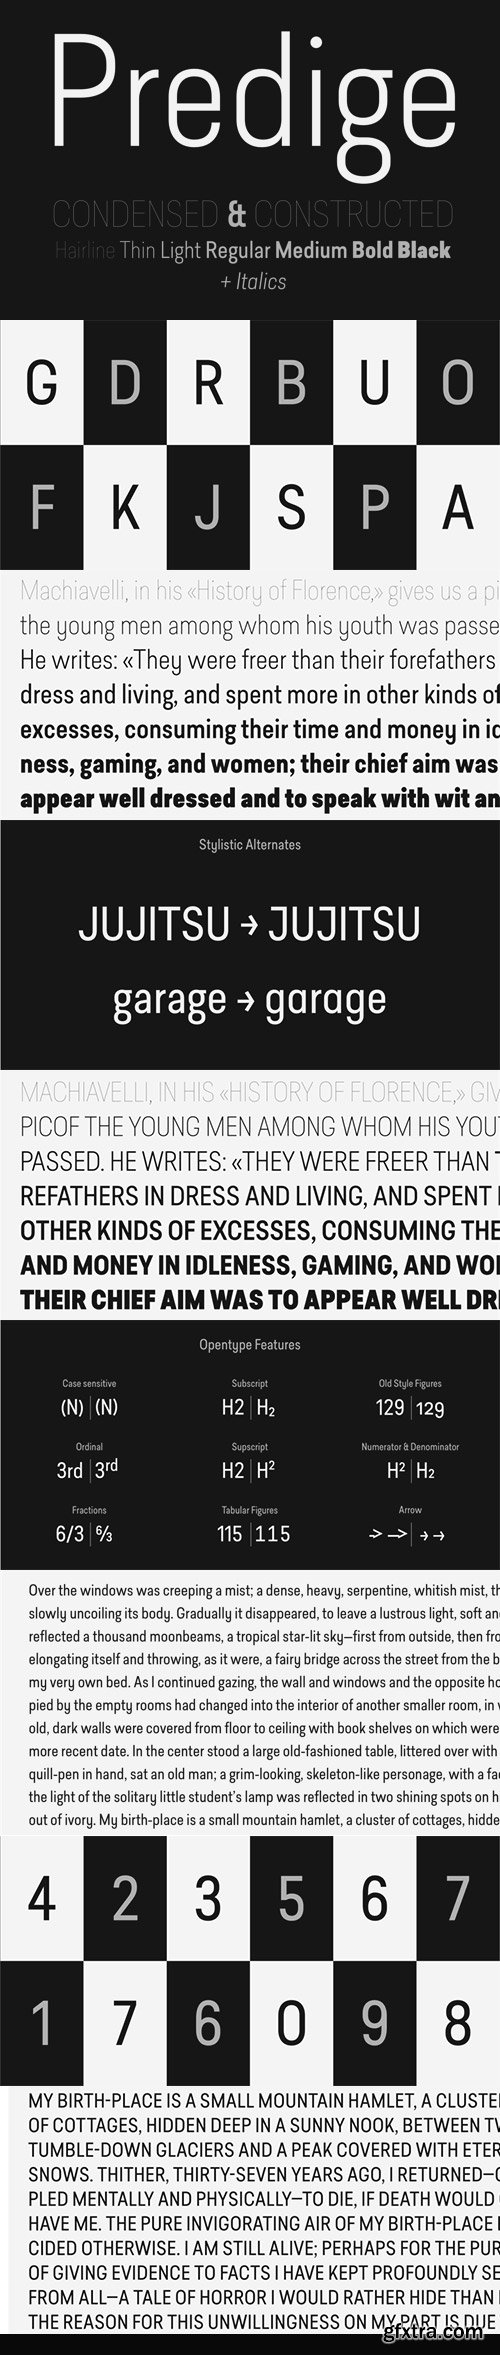 Predige - Condensed & Constructed Font Family 14xOTF $170